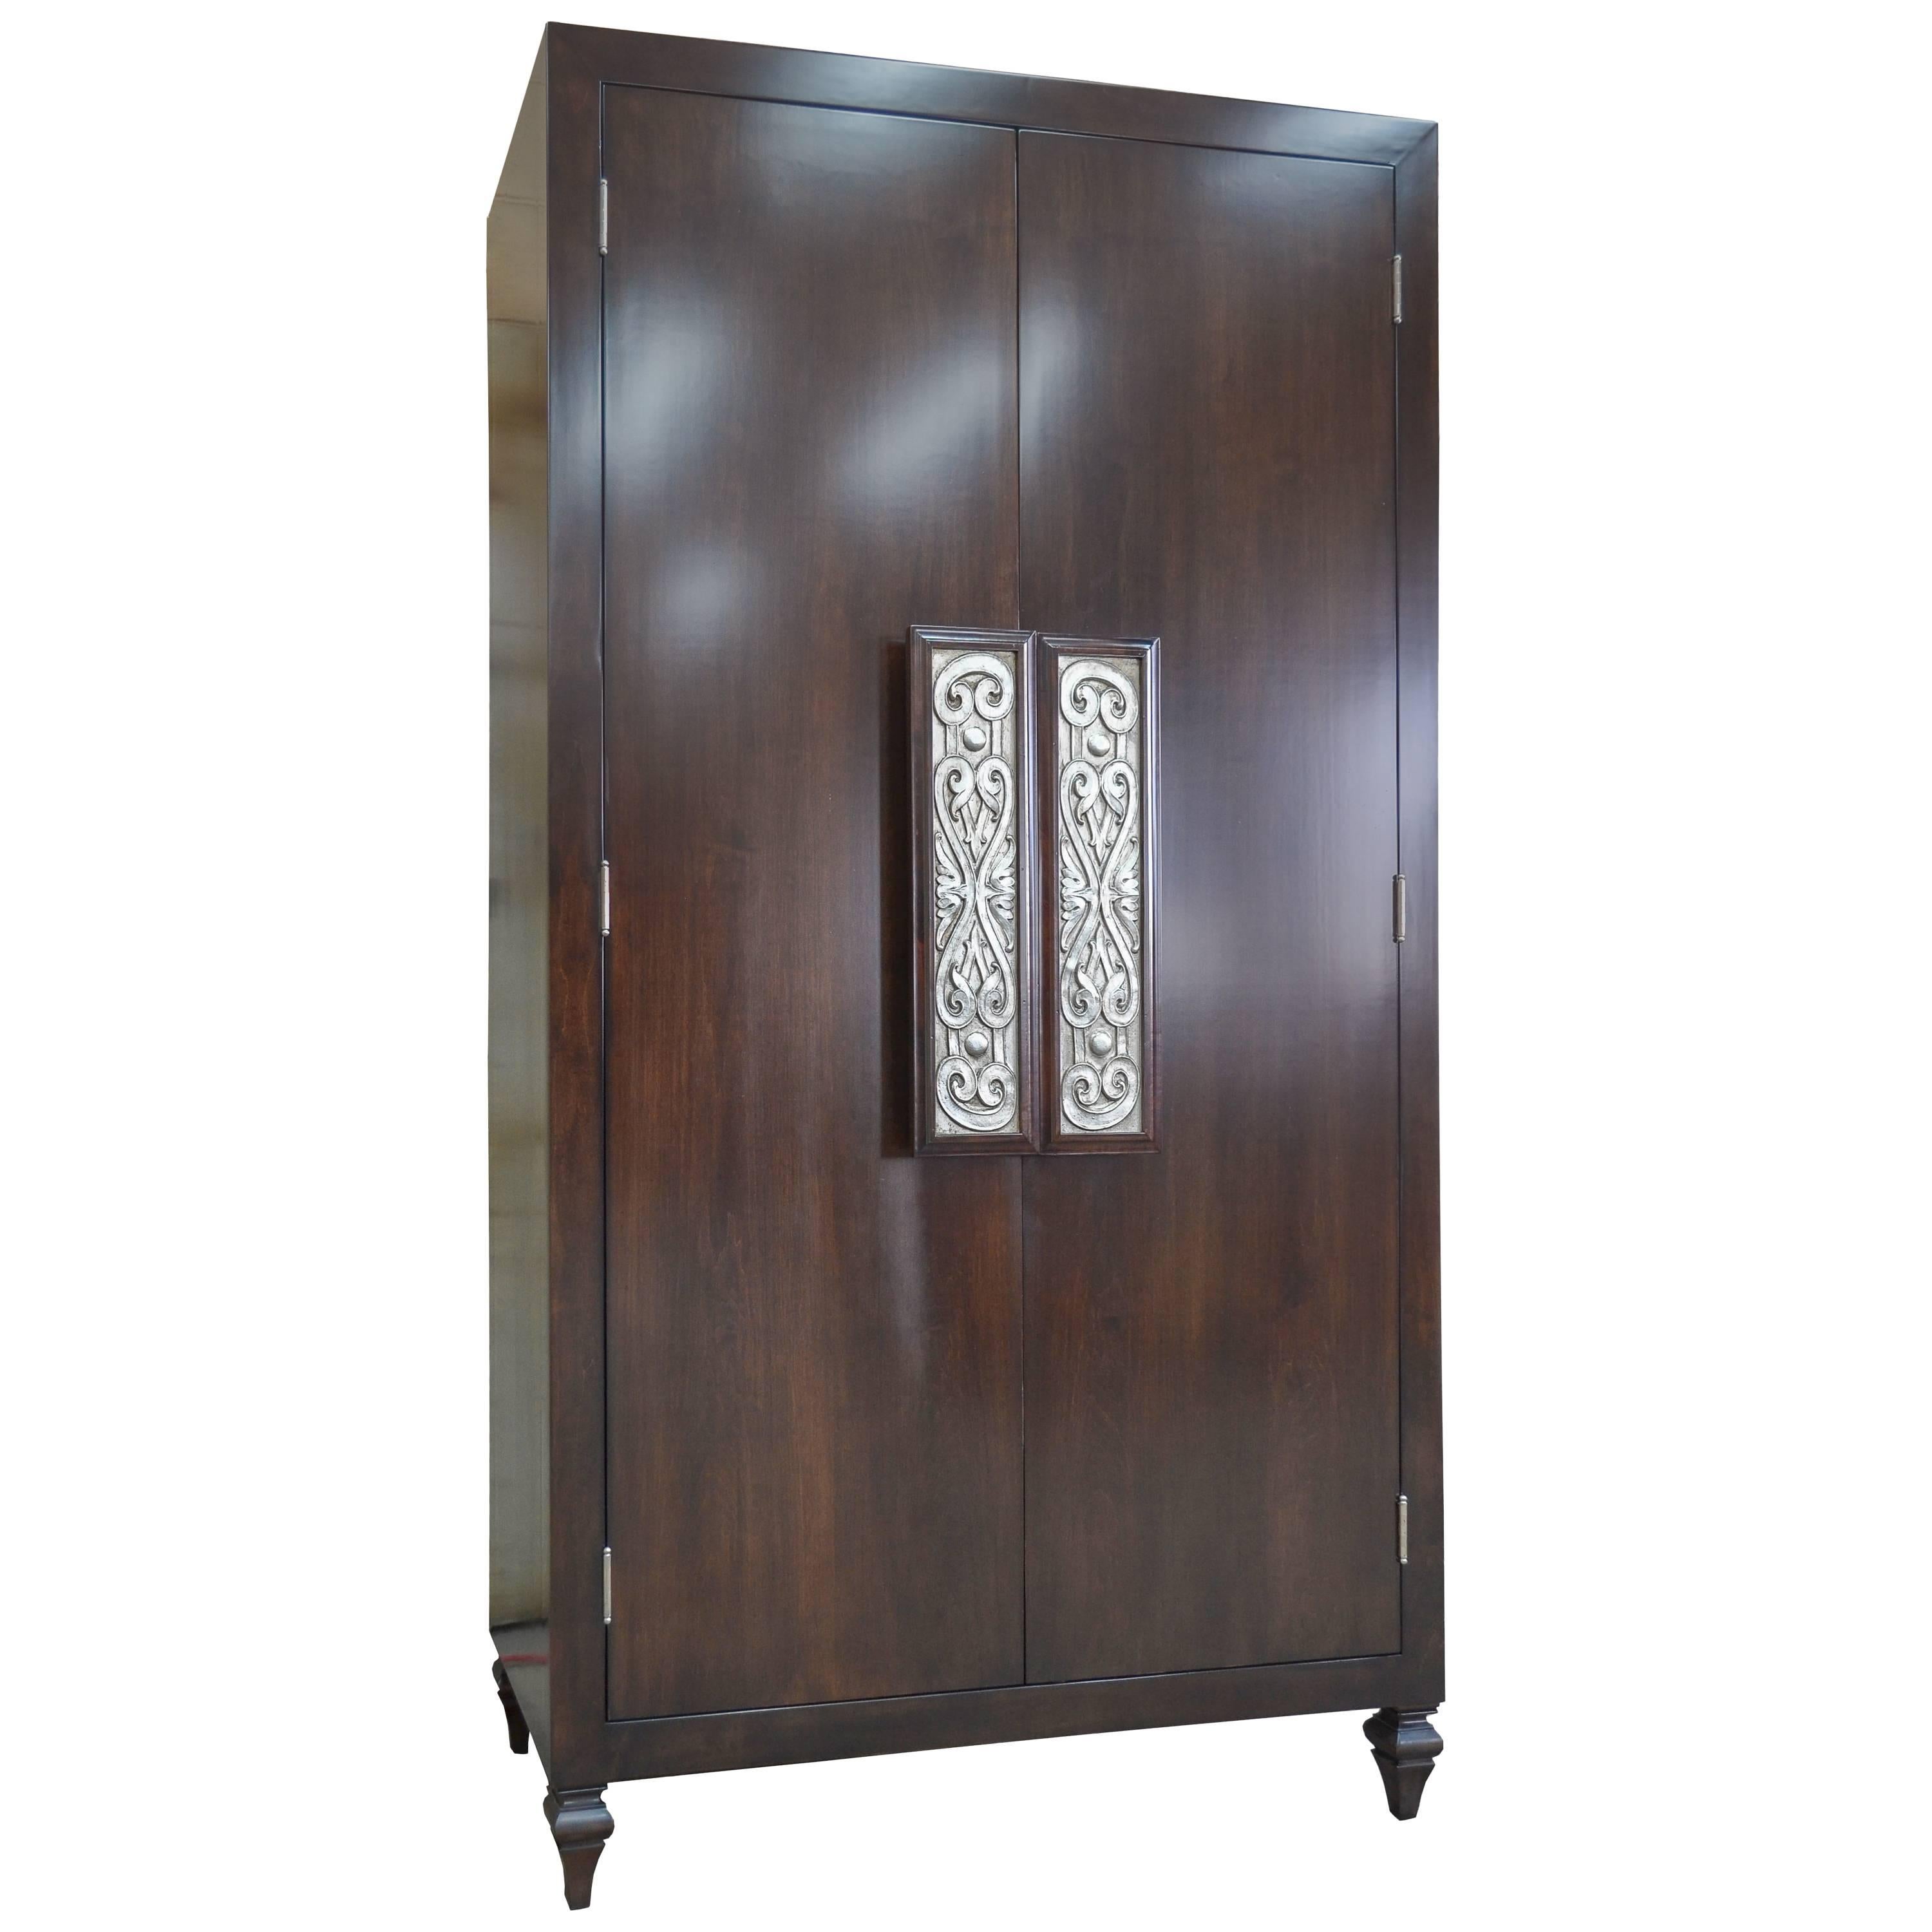 Custom Maple Cabinet with Silver Leaf Door Pulls For Sale